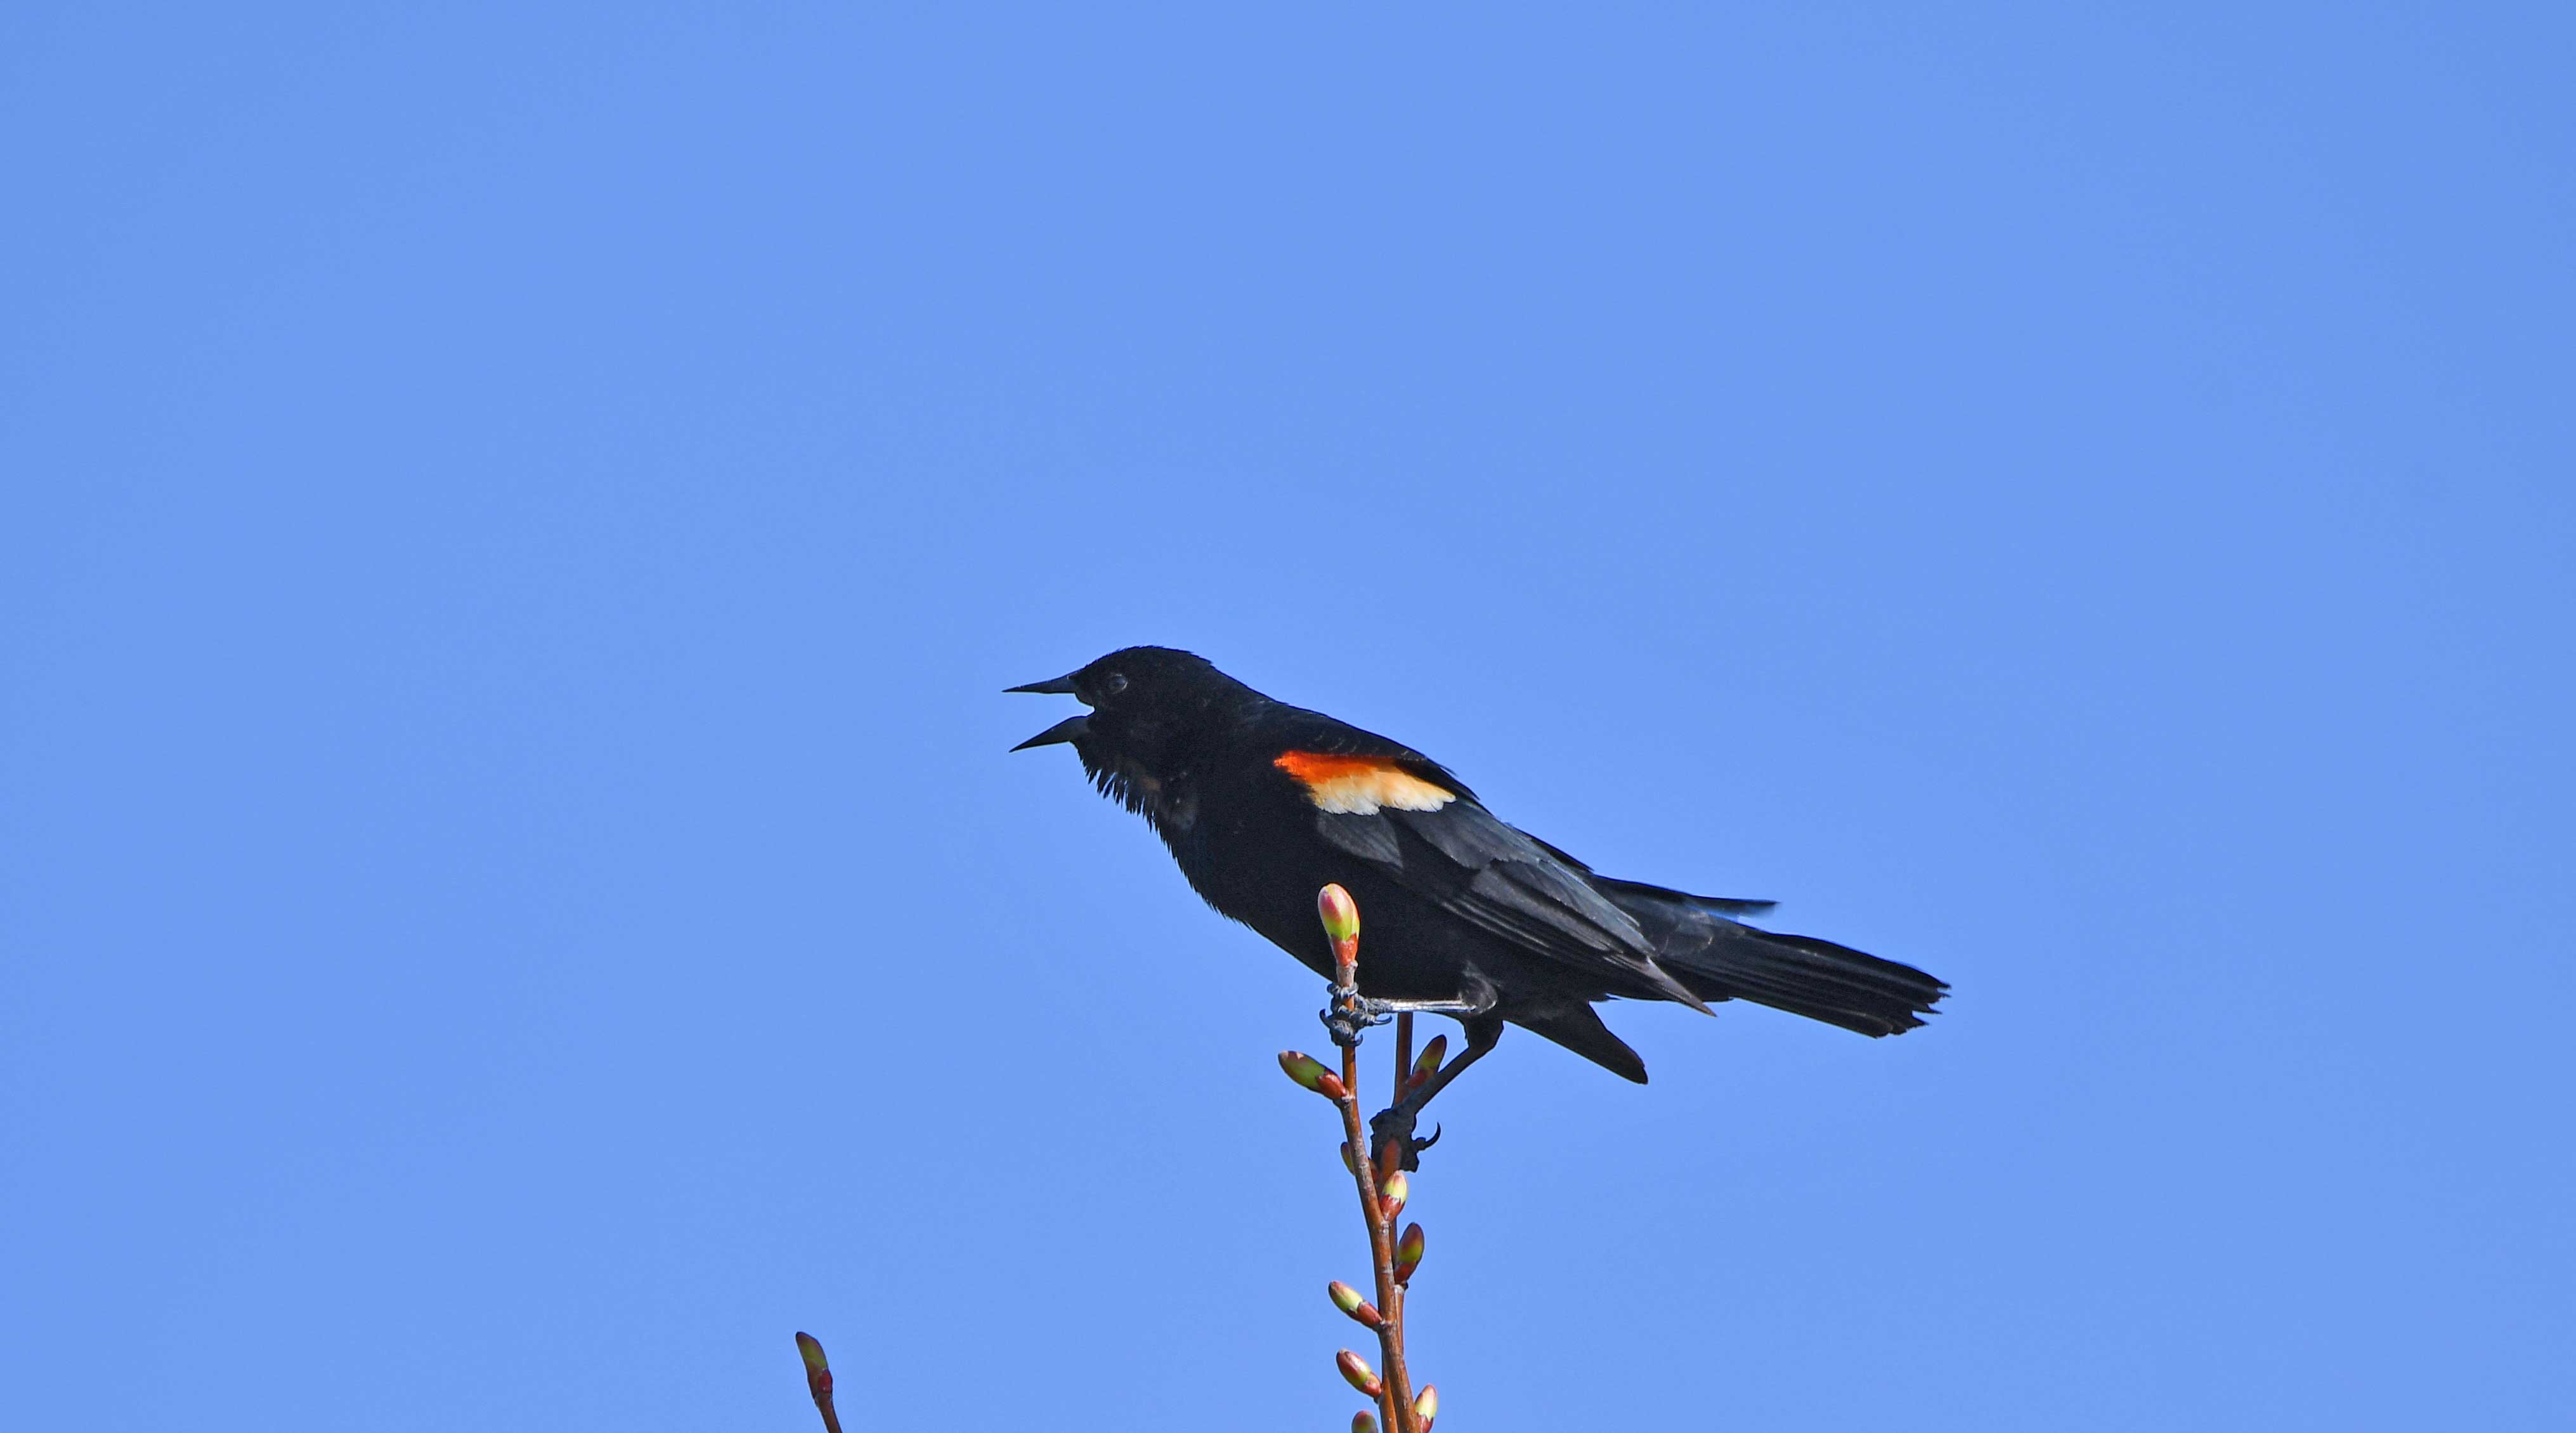 A red-winged blackbird on a branch with its mouth open.